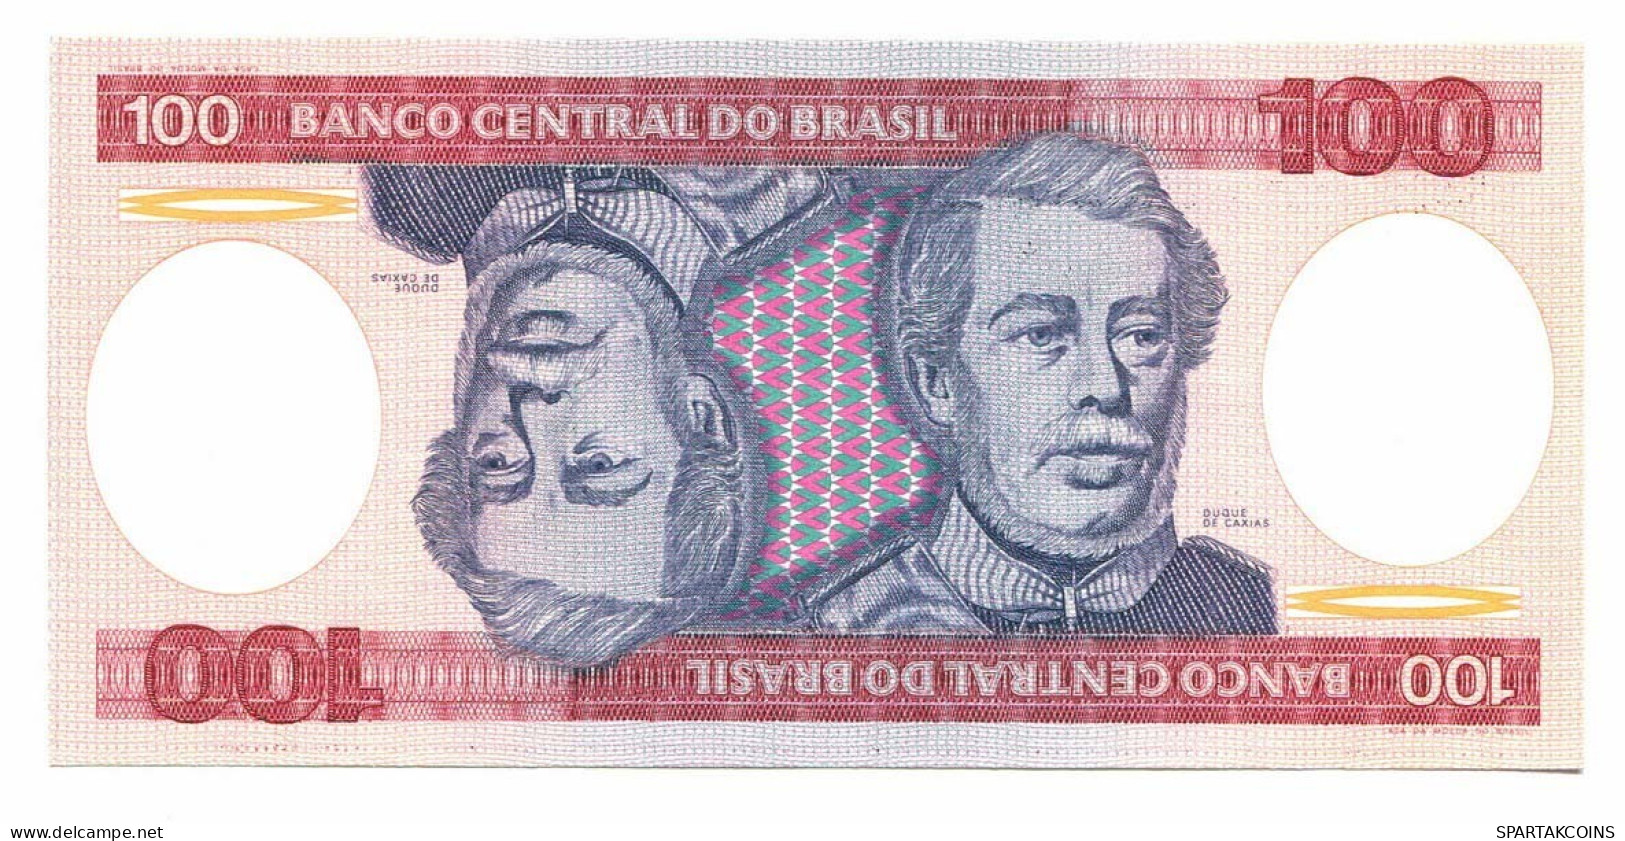 BRASIL 100 CRUZEIROS 1984 UNC Paper Money Banknote #P10853.4 - [11] Local Banknote Issues